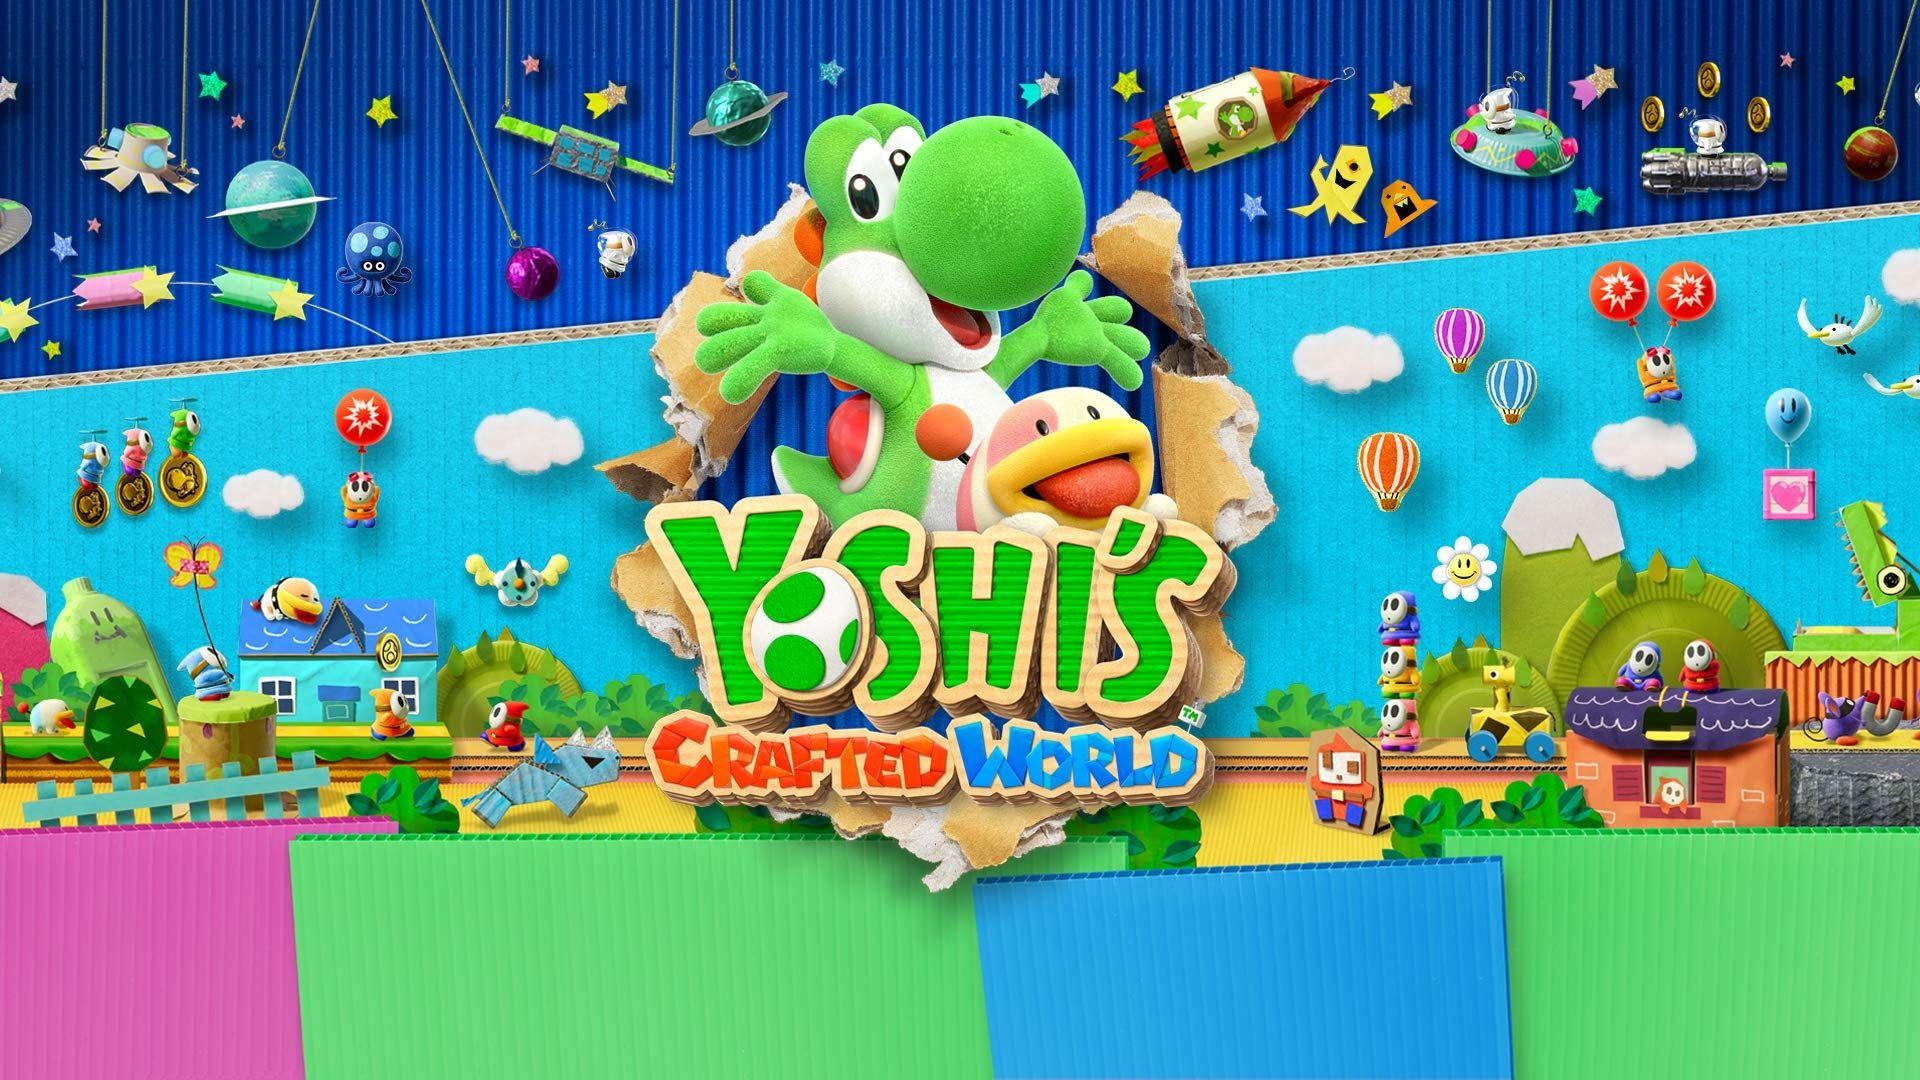 Yoshi's Crafted World HD Wallpaper. Background Imagex1080